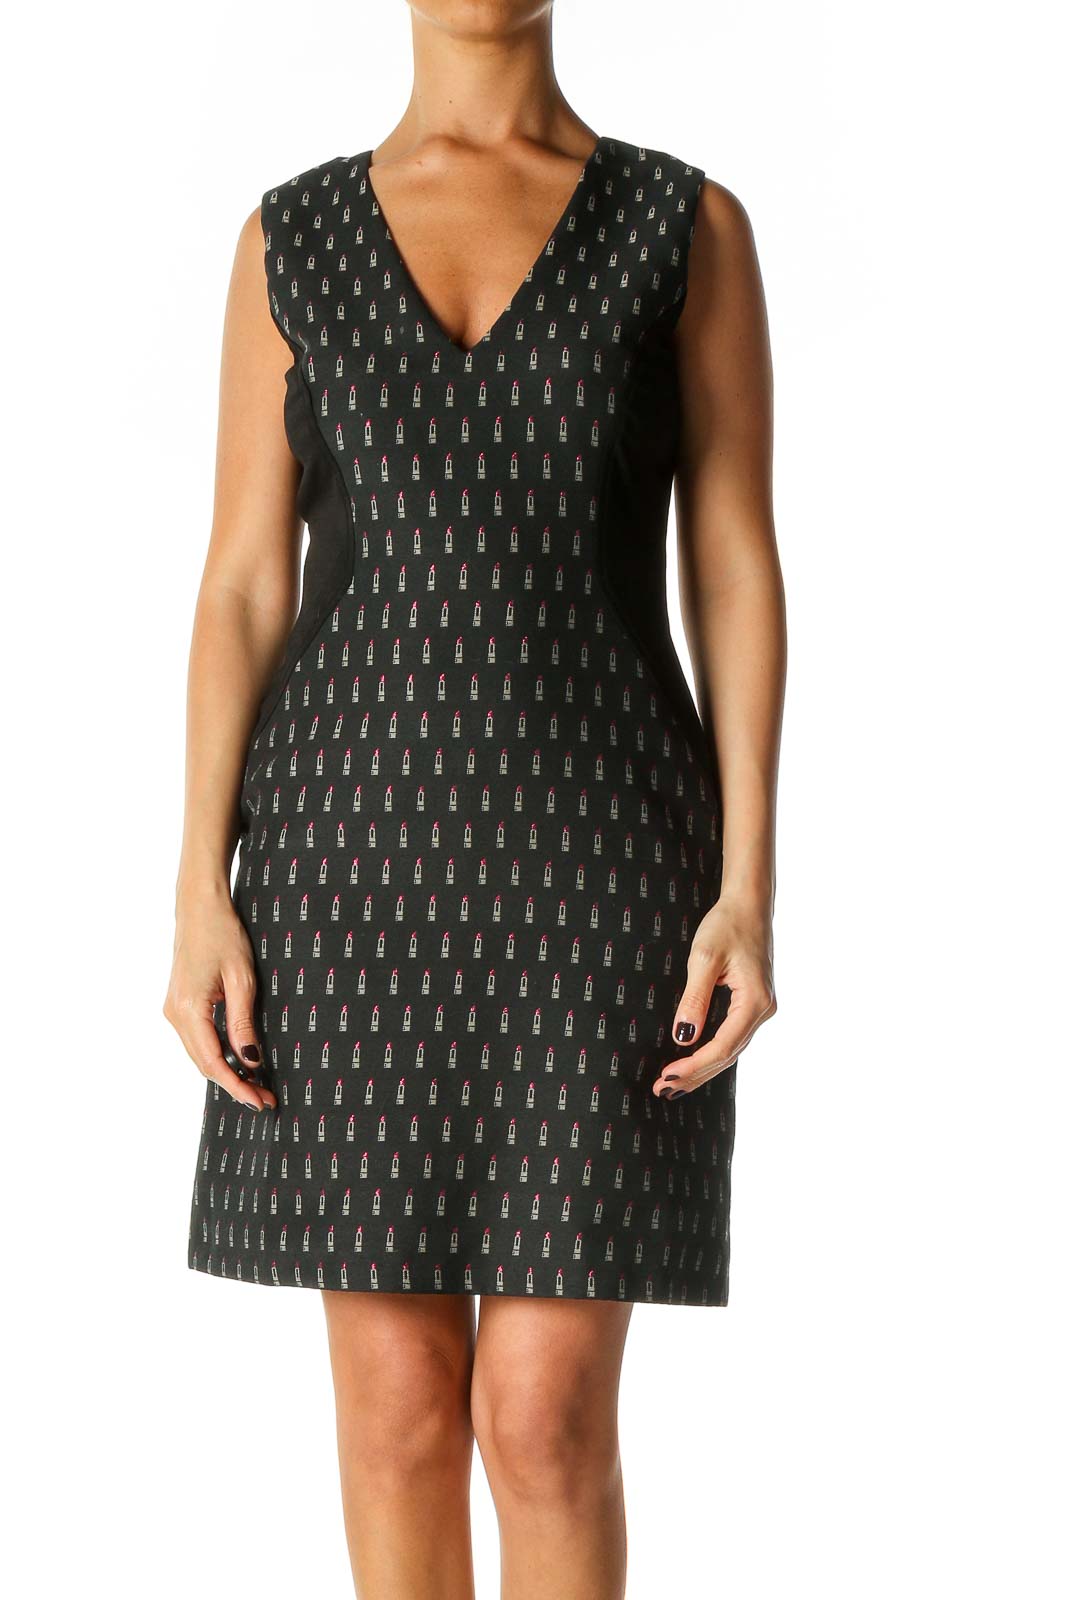 Black Object Print Casual A-Line Dress Front